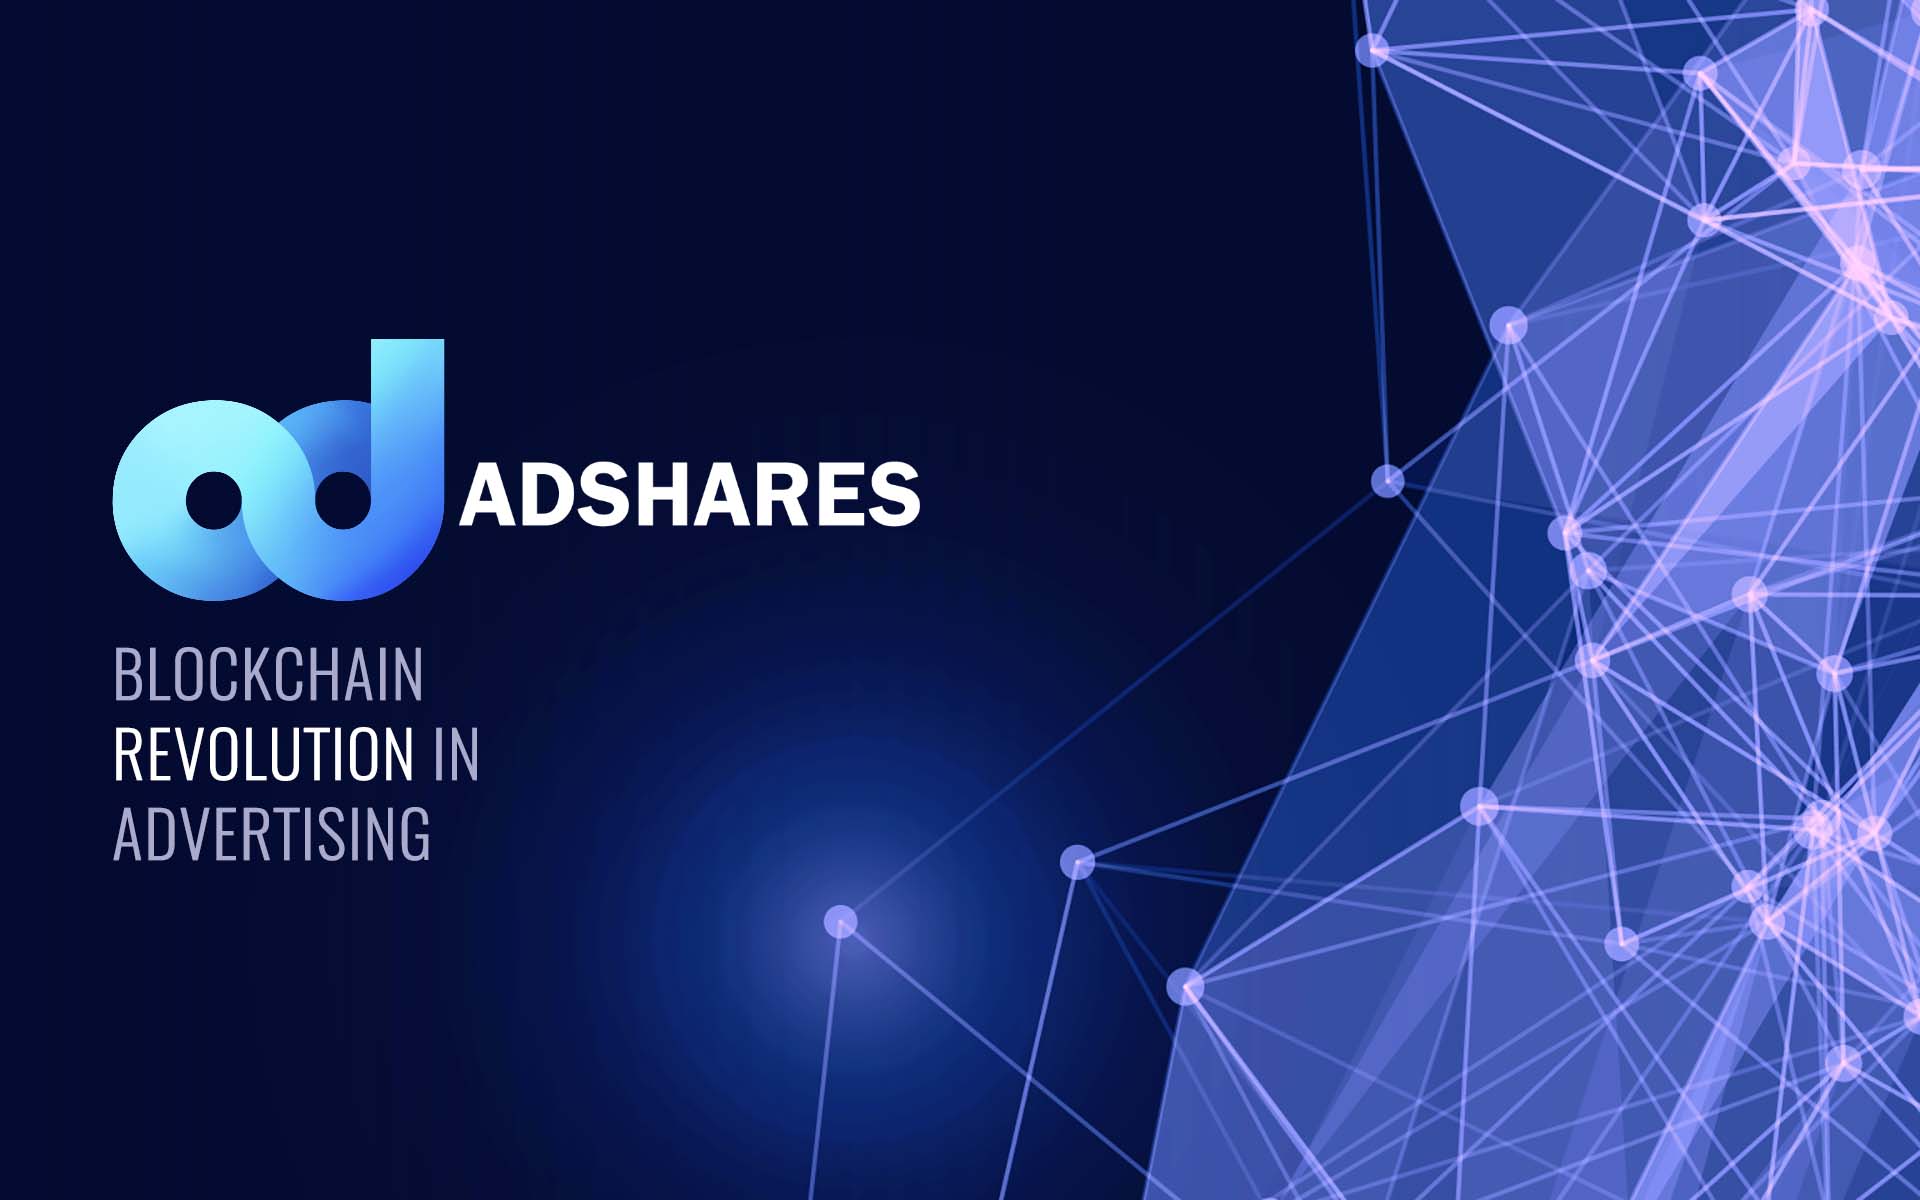 Adshares Token Crowdsale Is Nearly Over! The Revolution of Digital Advertising Shows Potential.